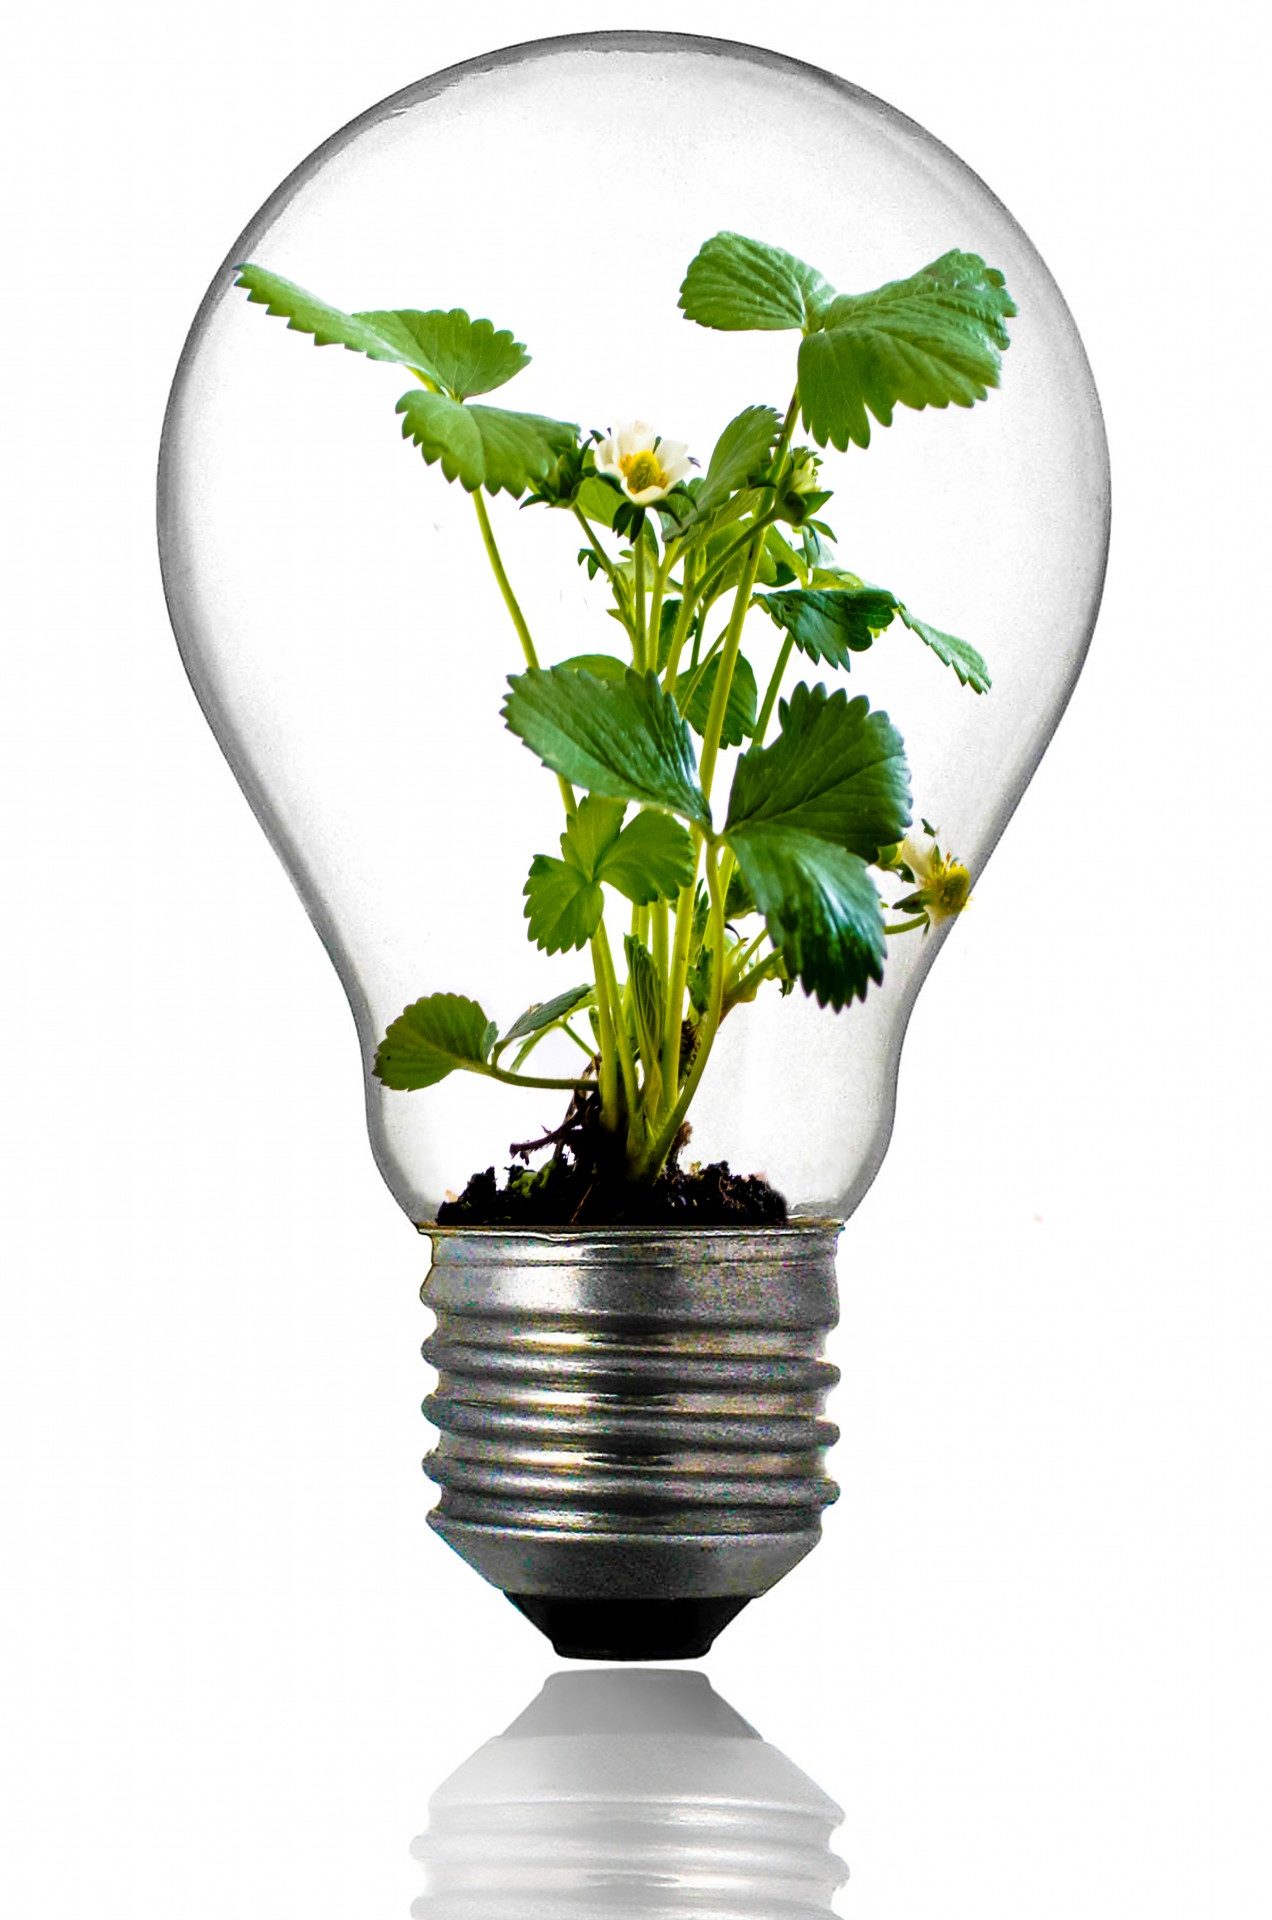 A picture of a plant in a light bulb